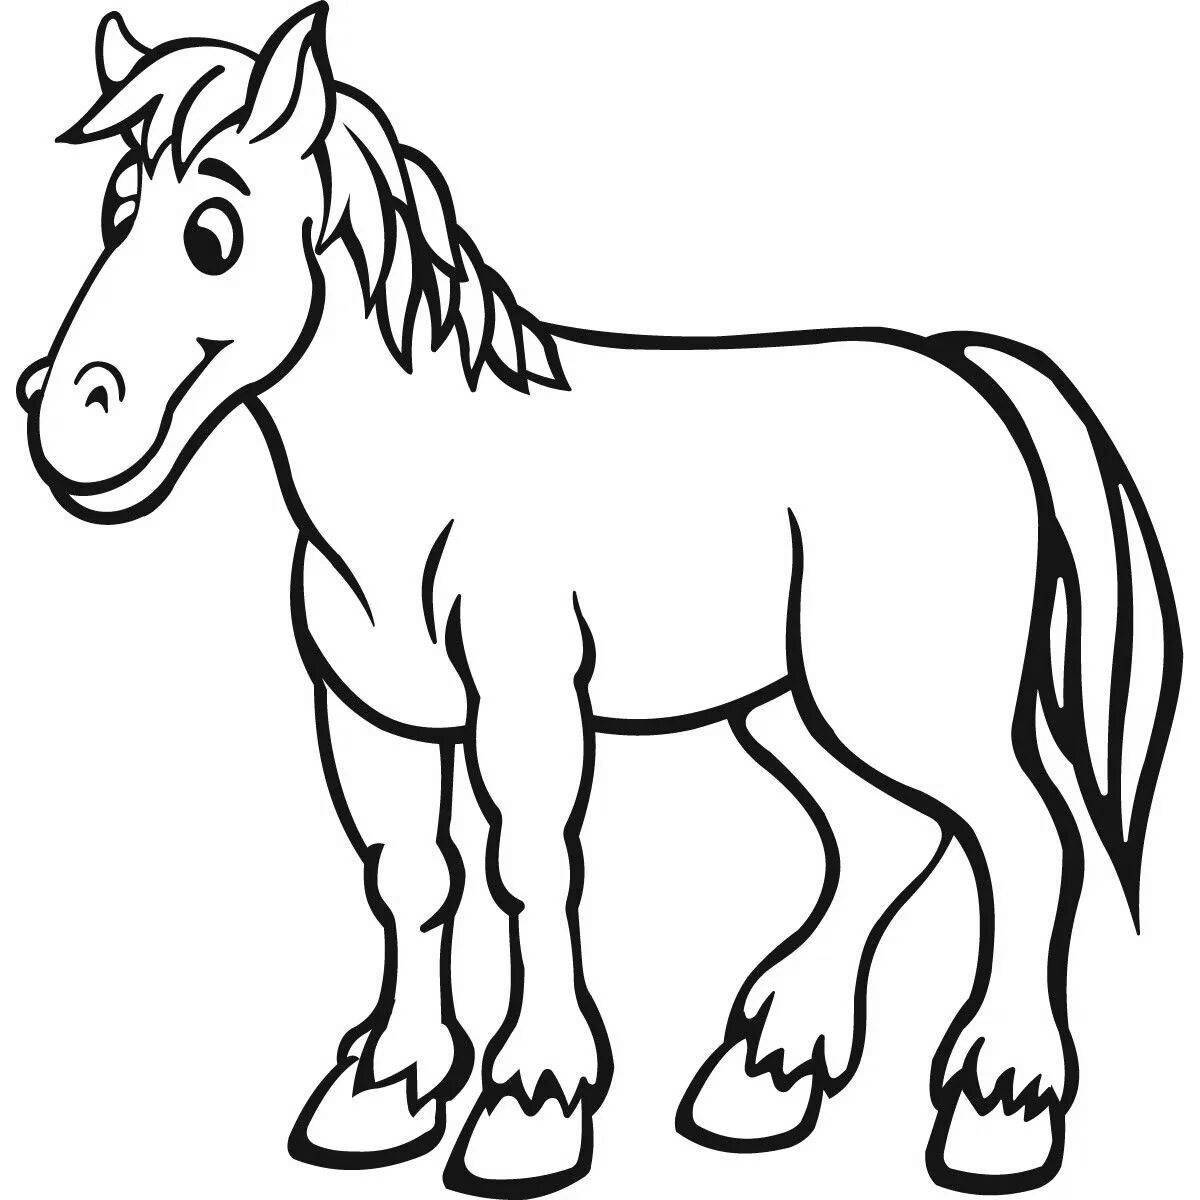 Cute horse coloring book for 2-3 year olds